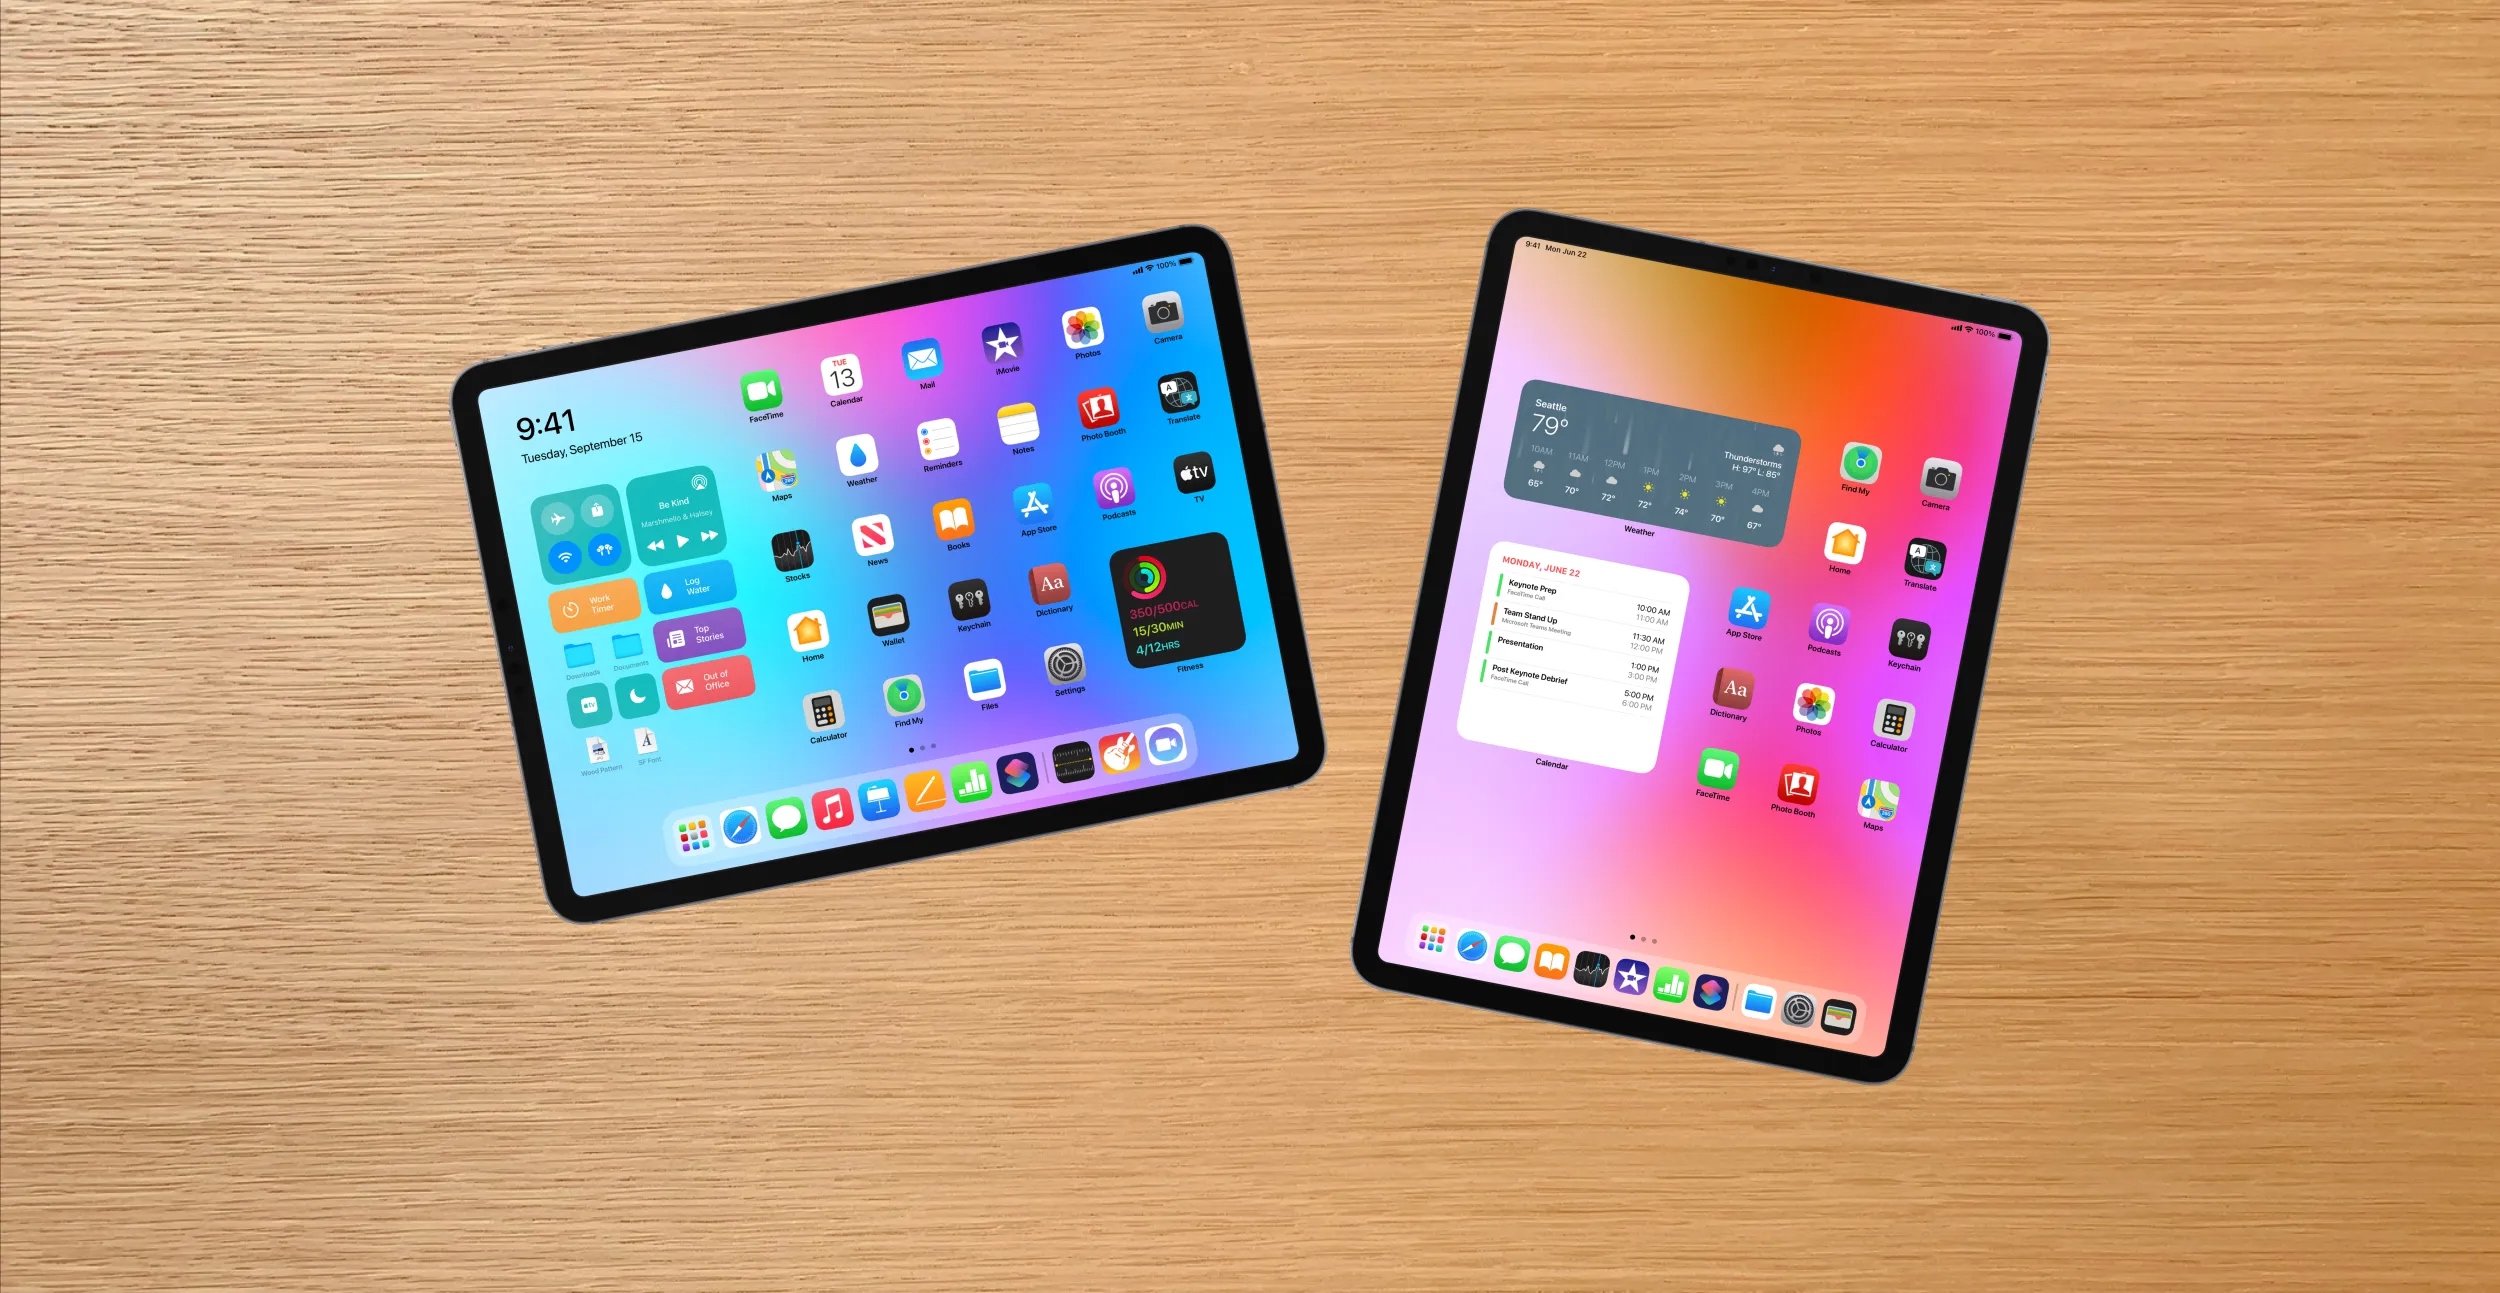 Bloomberg Ios 15 To Feature Redesigned Ipad Home Screen New Notifications Options 9to5mac